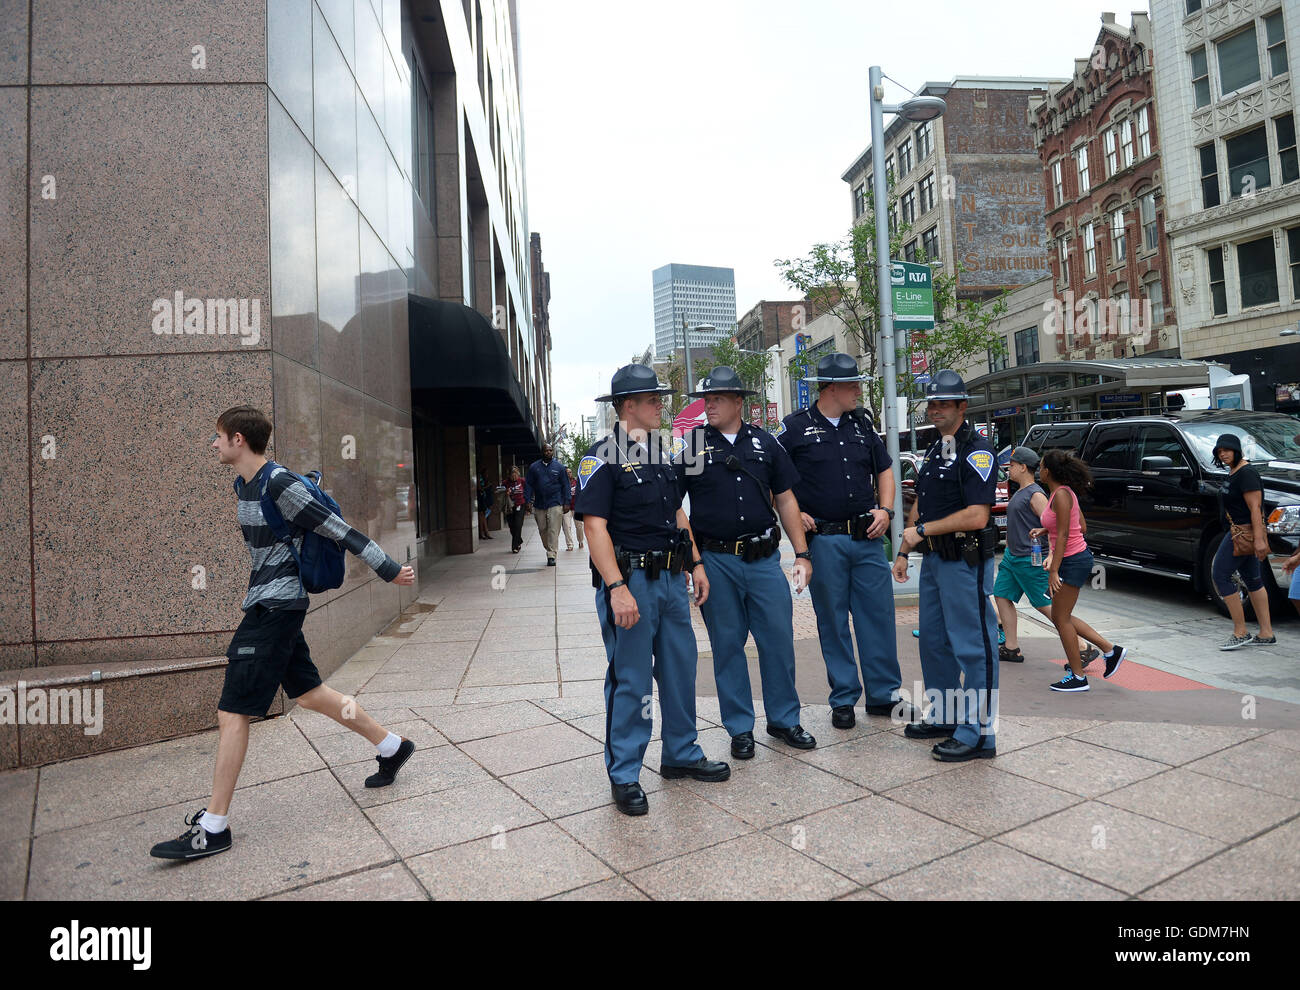 Cleveland, USA. 18th July, 2016. Police patrol near the Quicken Loans Arena where the Republican National Convention is held in Cleveland, Ohio, the United States, July 18, 2016. © Yin Bogu/Xinhua/Alamy Live News Stock Photo